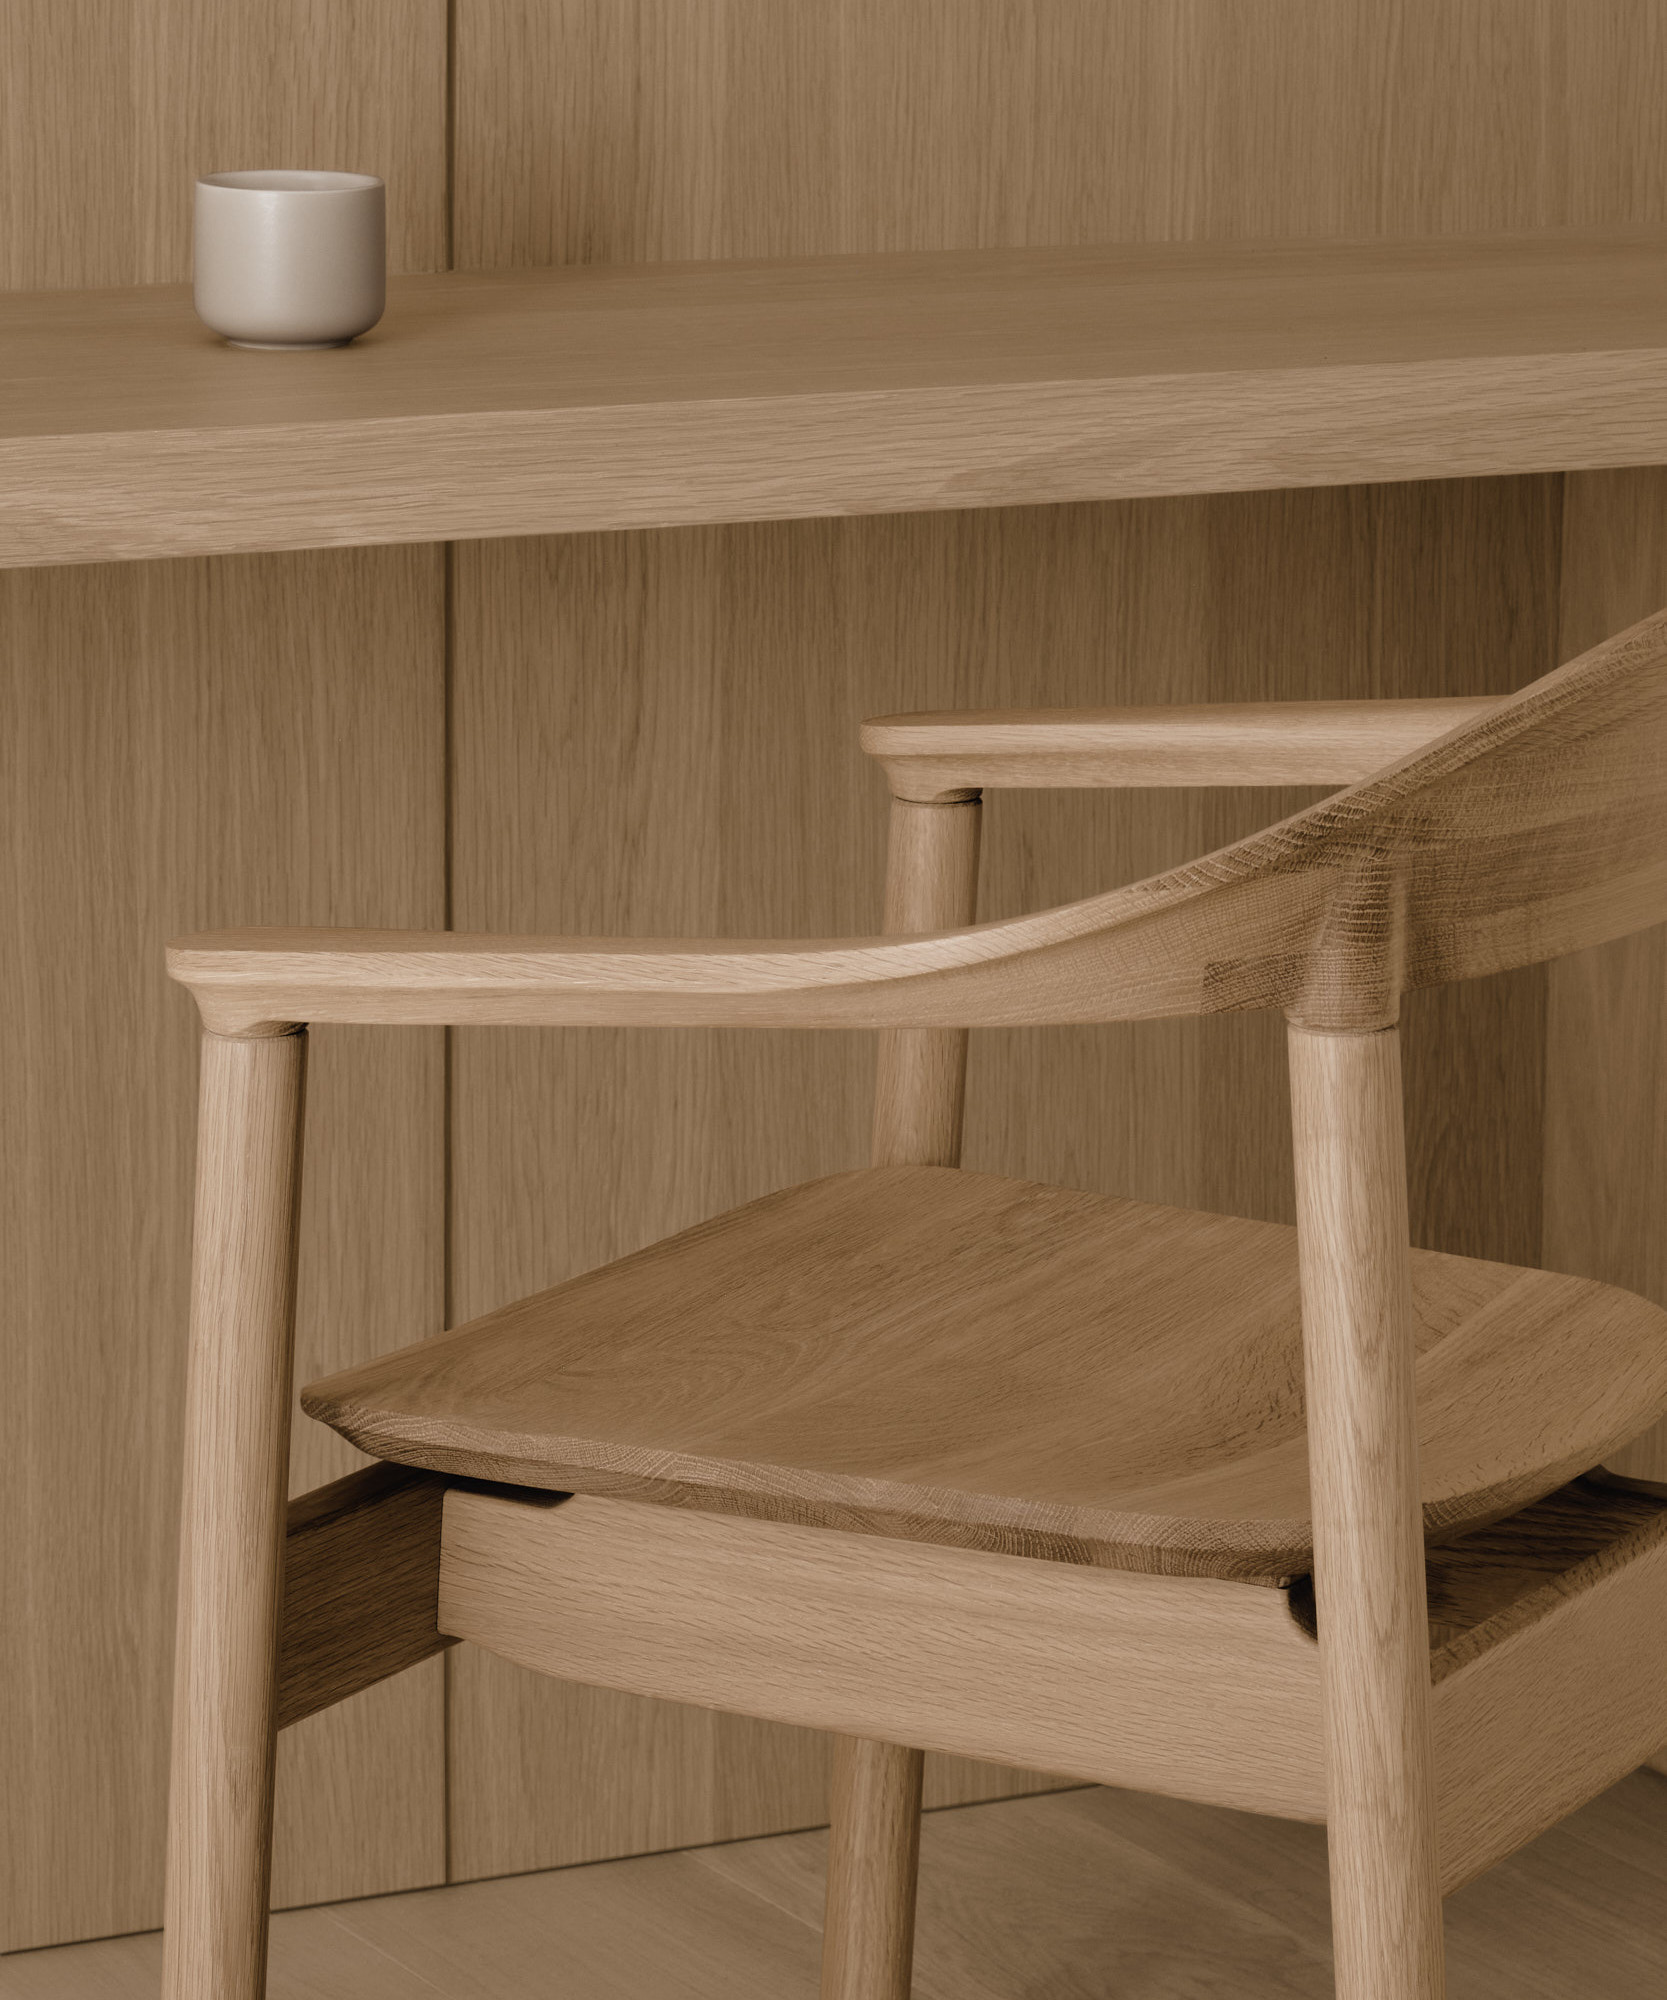 A close up of the Dune armrest in white oak